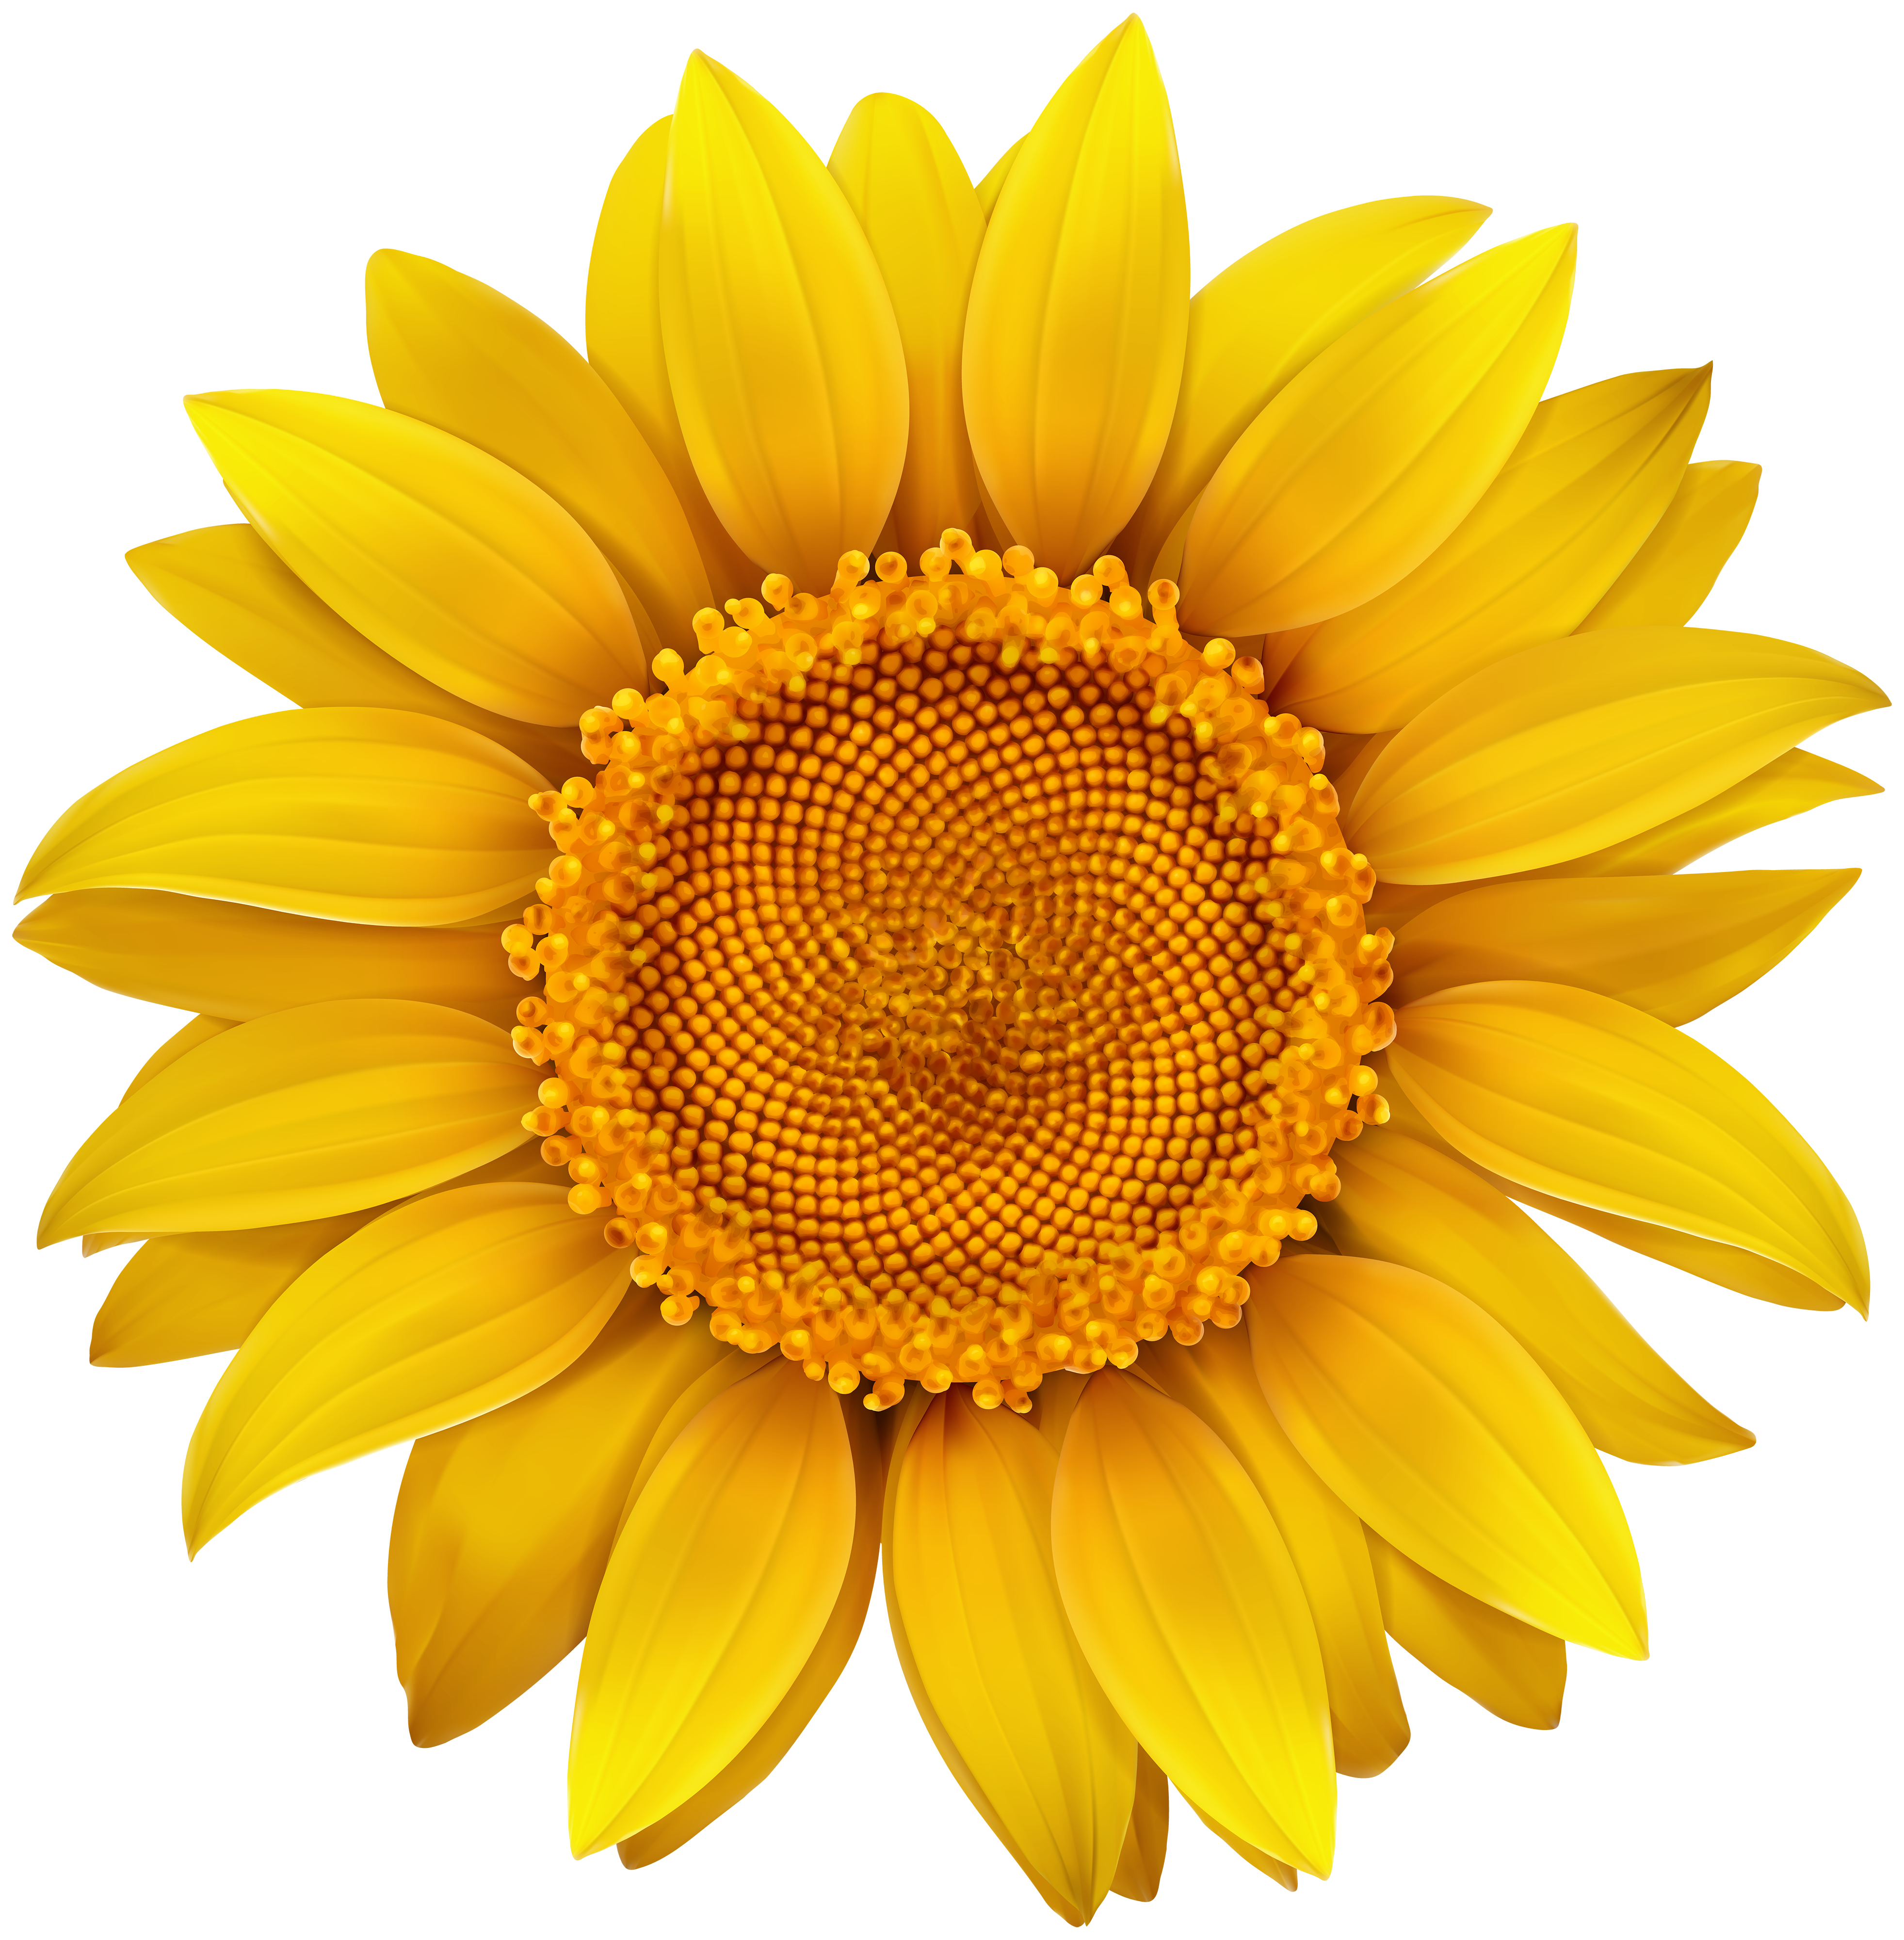 Sunflower PNG Image | Gallery Yopriceville - High-Quality ...